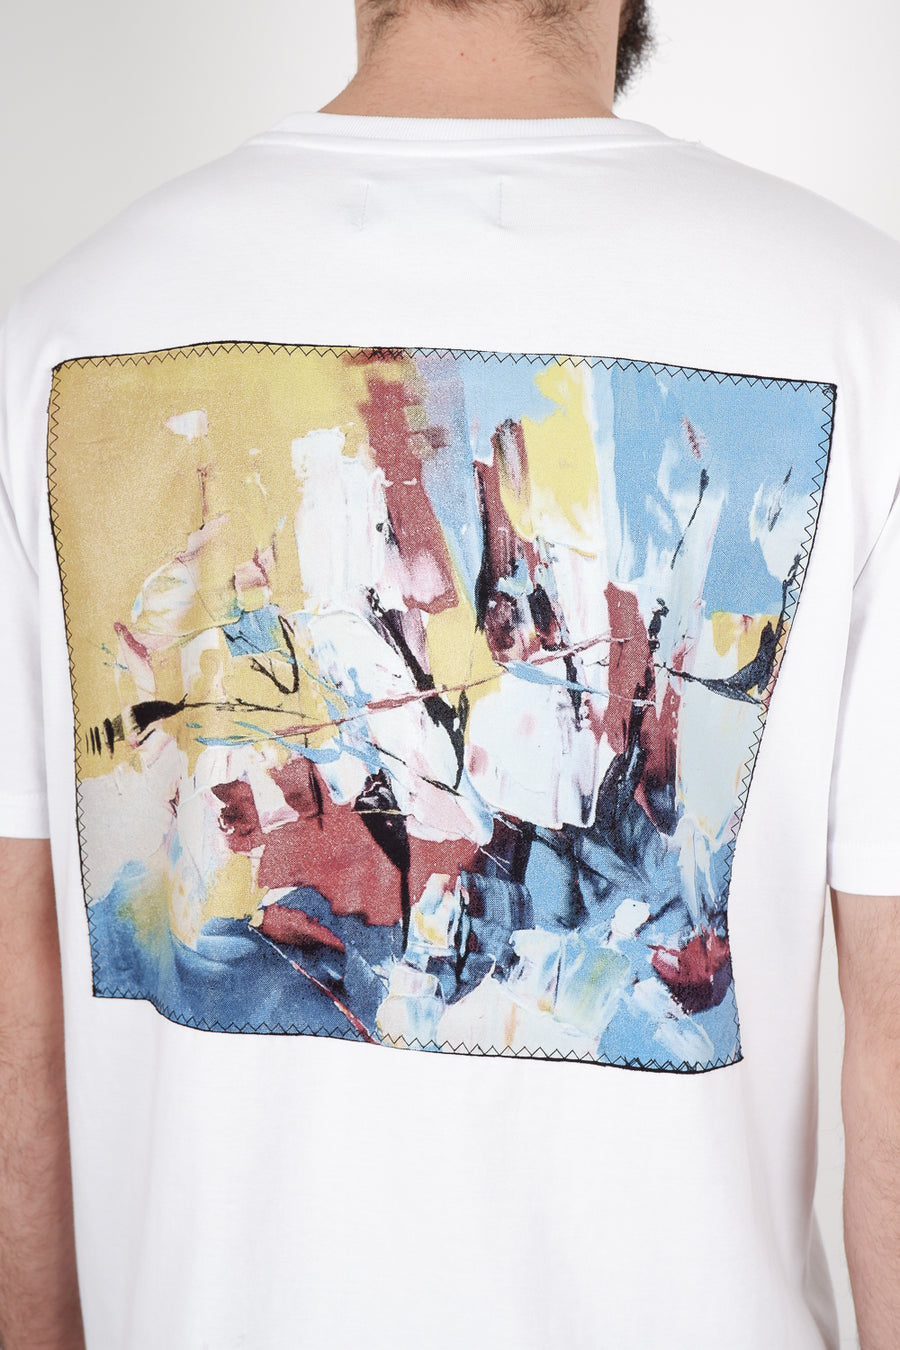 Buy the ABE Abstract T-Shirt in White at Intro. Spend £50 for free UK delivery. Official stockists. We ship worldwide.